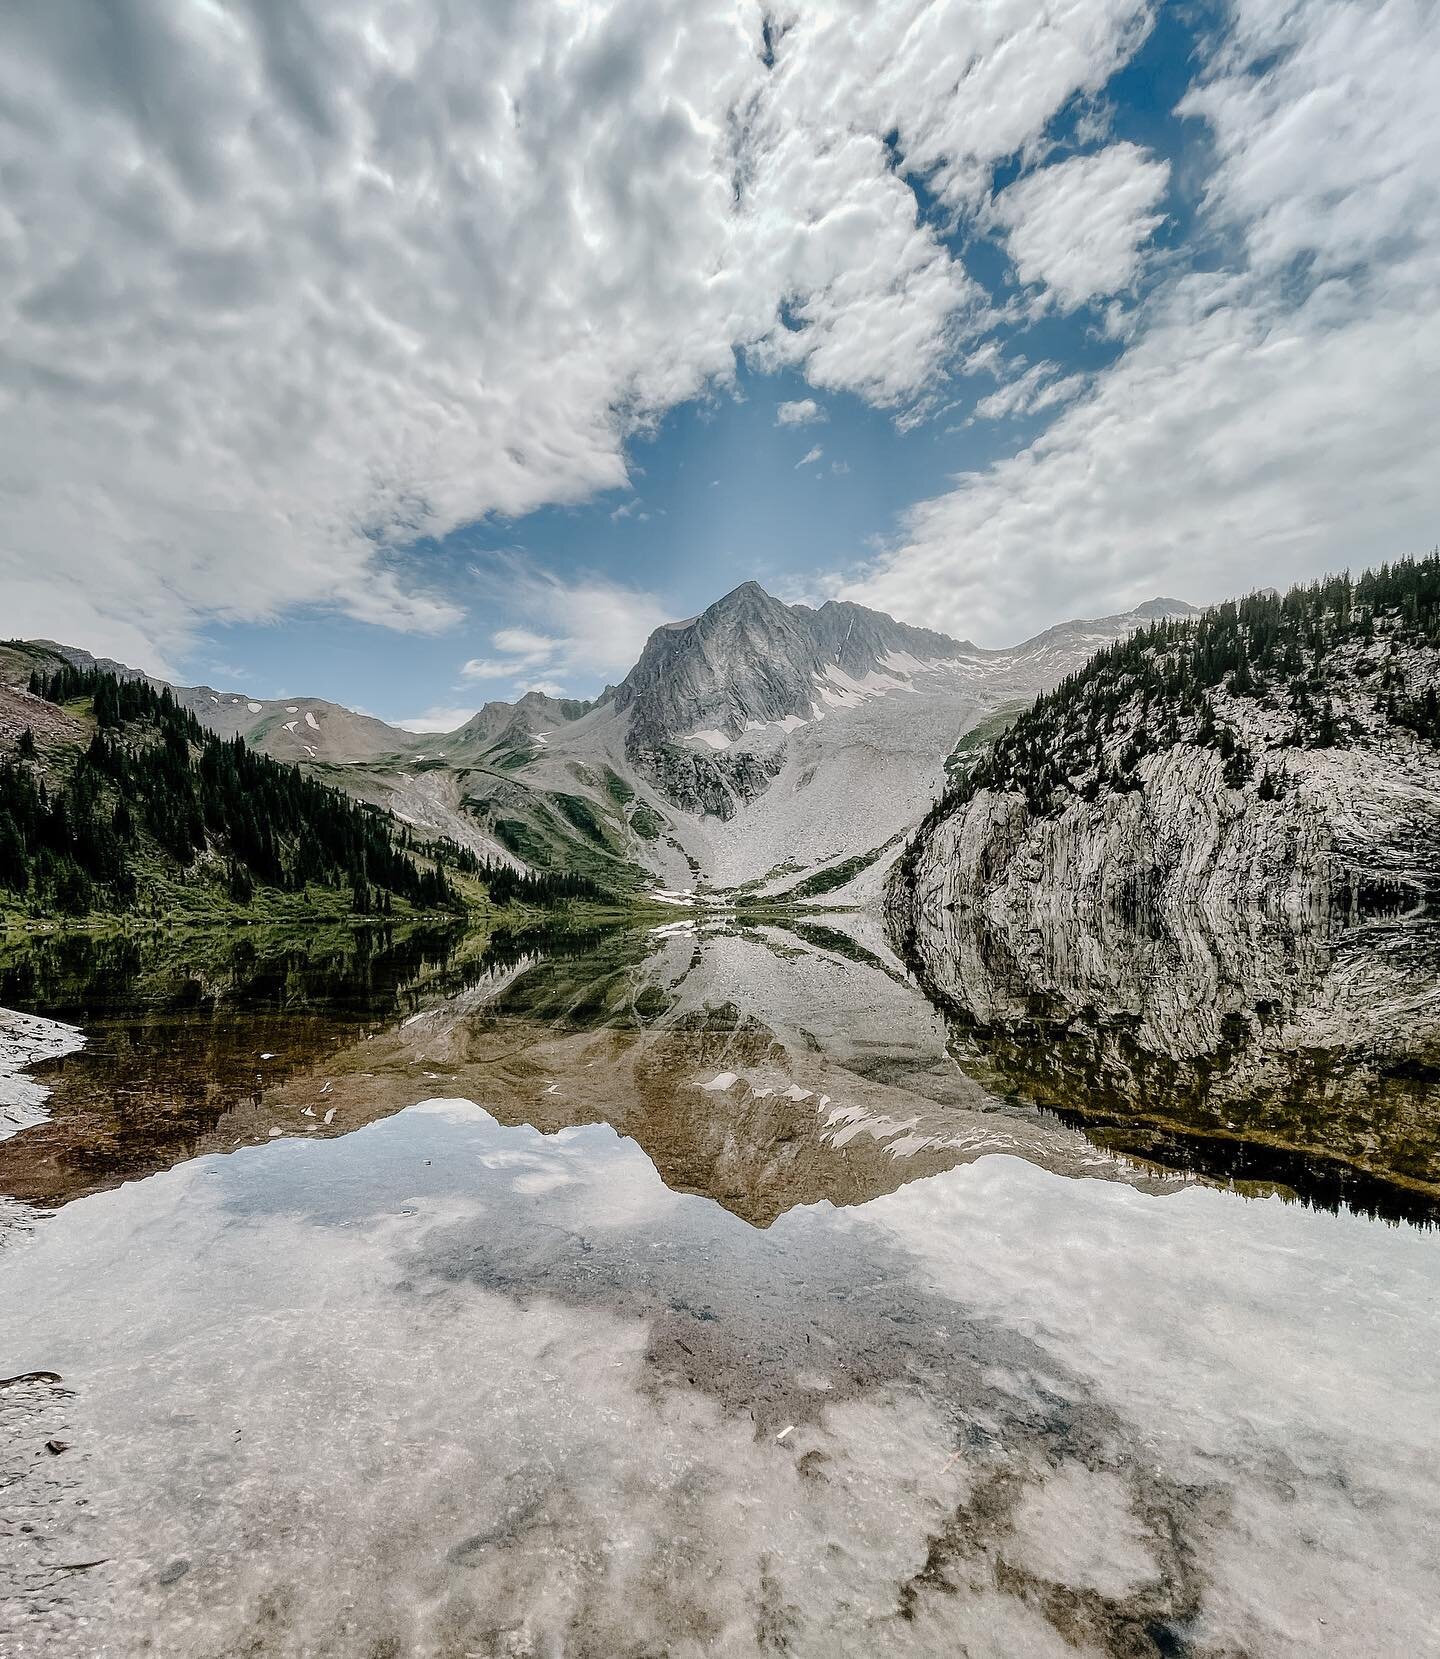 Pro Tip: Turn your phone upside down when looking at this photo to see what a perfect reflection the water has 🏔 

The Four Pass Loop in Colorado showcases some of Colorado&rsquo;s best nature. The shorter peak just to the left of Snowmass Peak is t